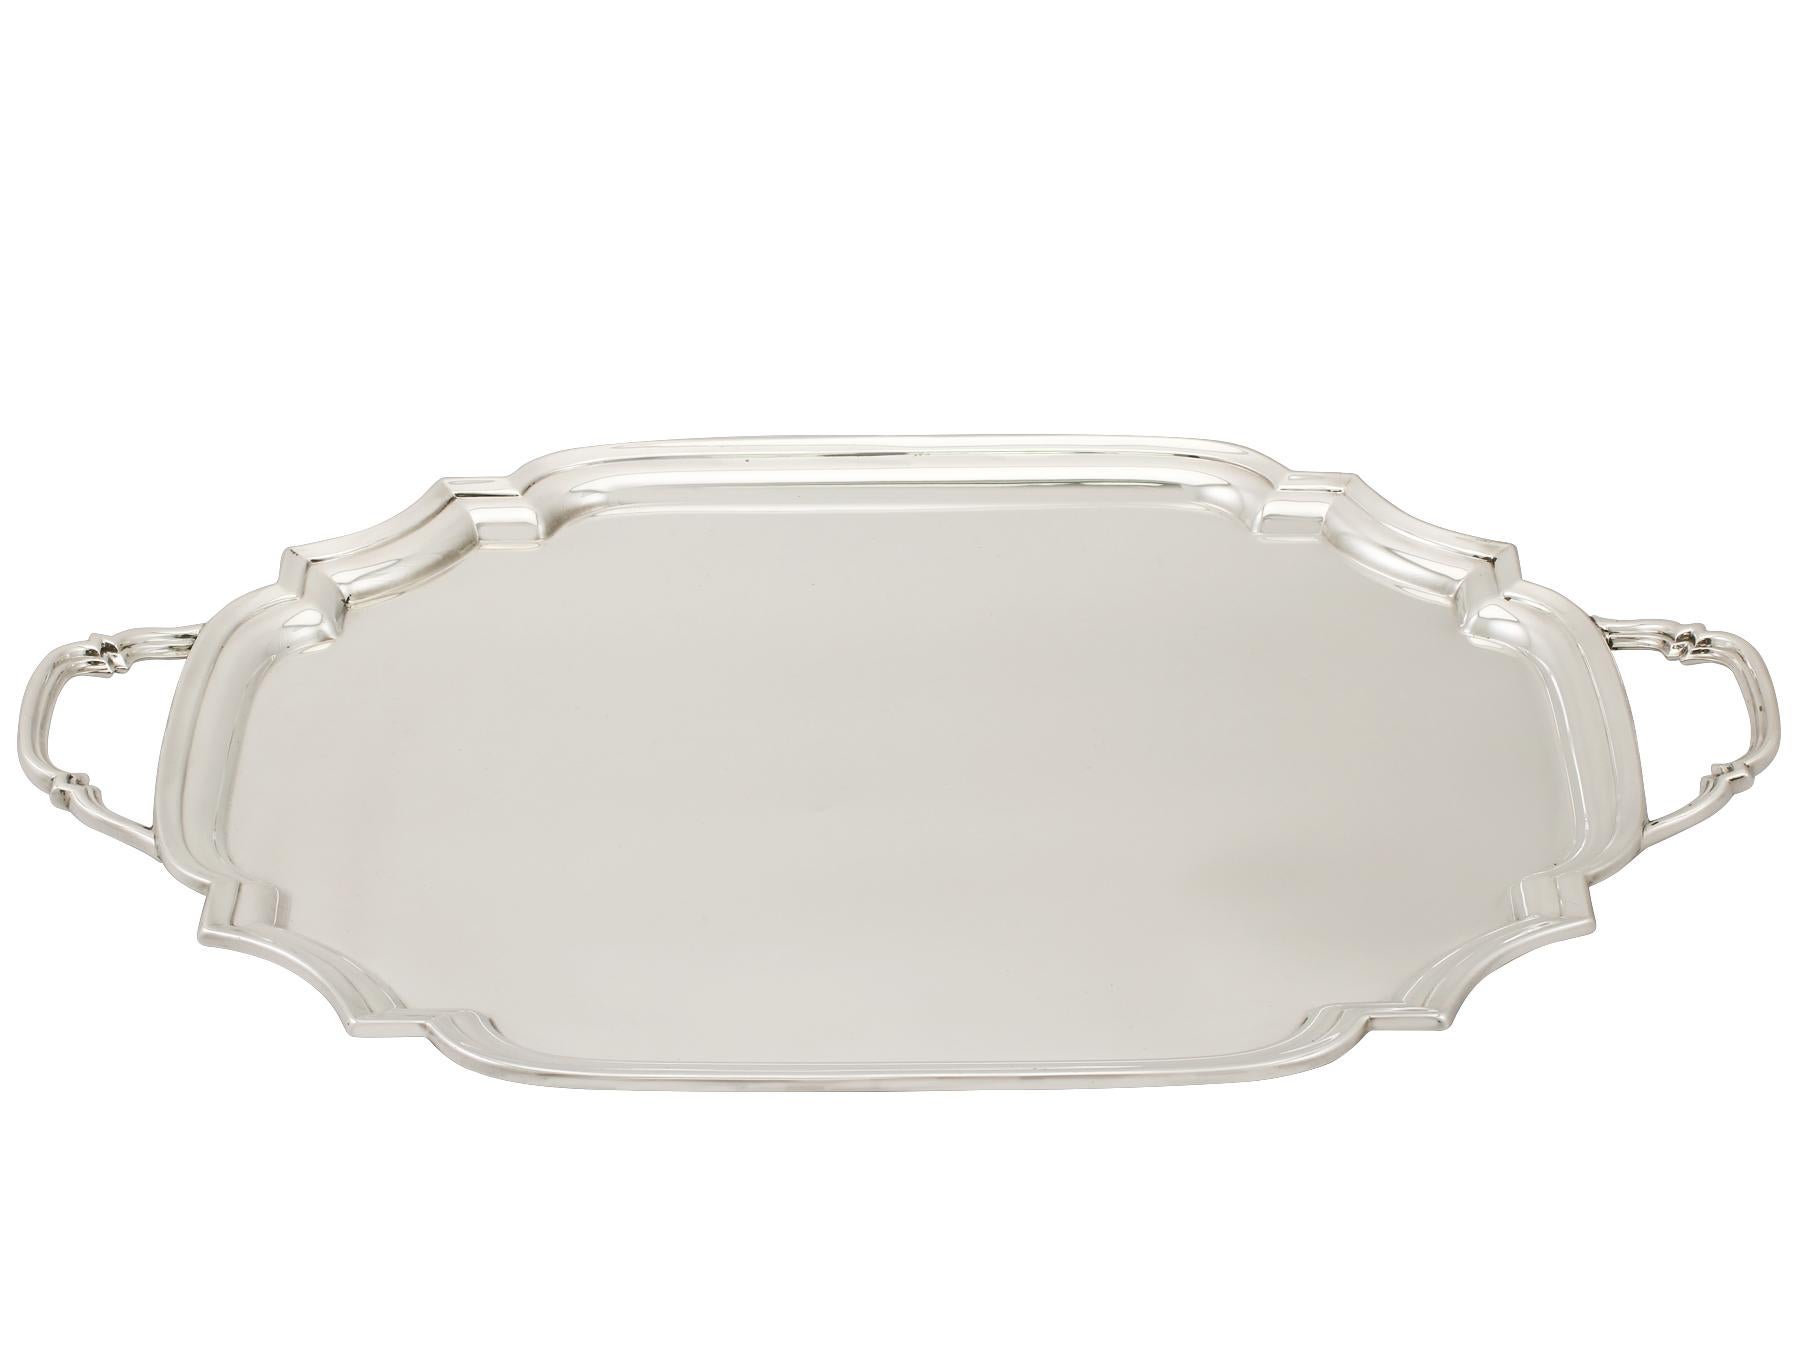 An exceptional, fine and impressive antique George V English sterling silver Art Deco drinks tray; an addition to our ornamental silverware collection.

This exceptional antique George V sterling silver drinks tray has a rectangular shaped form